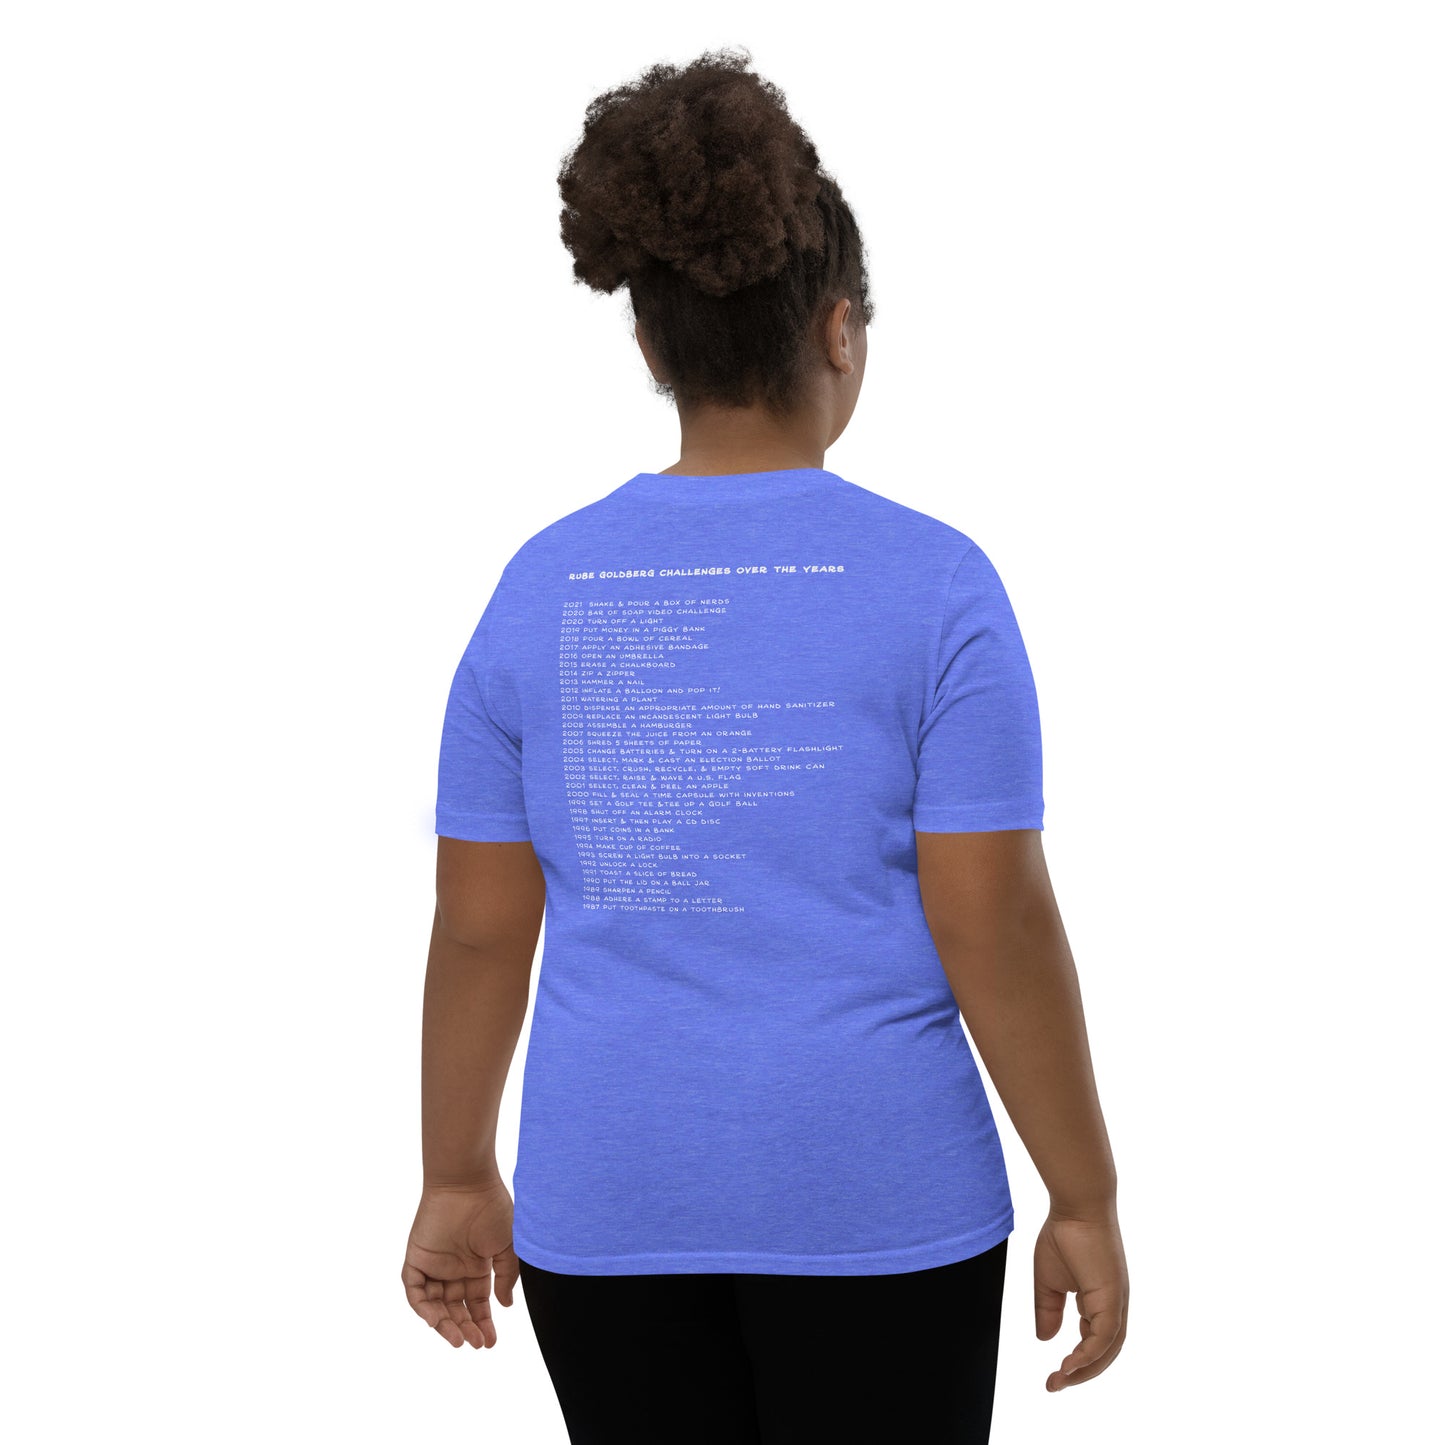 Inventor in Training Youth Tee